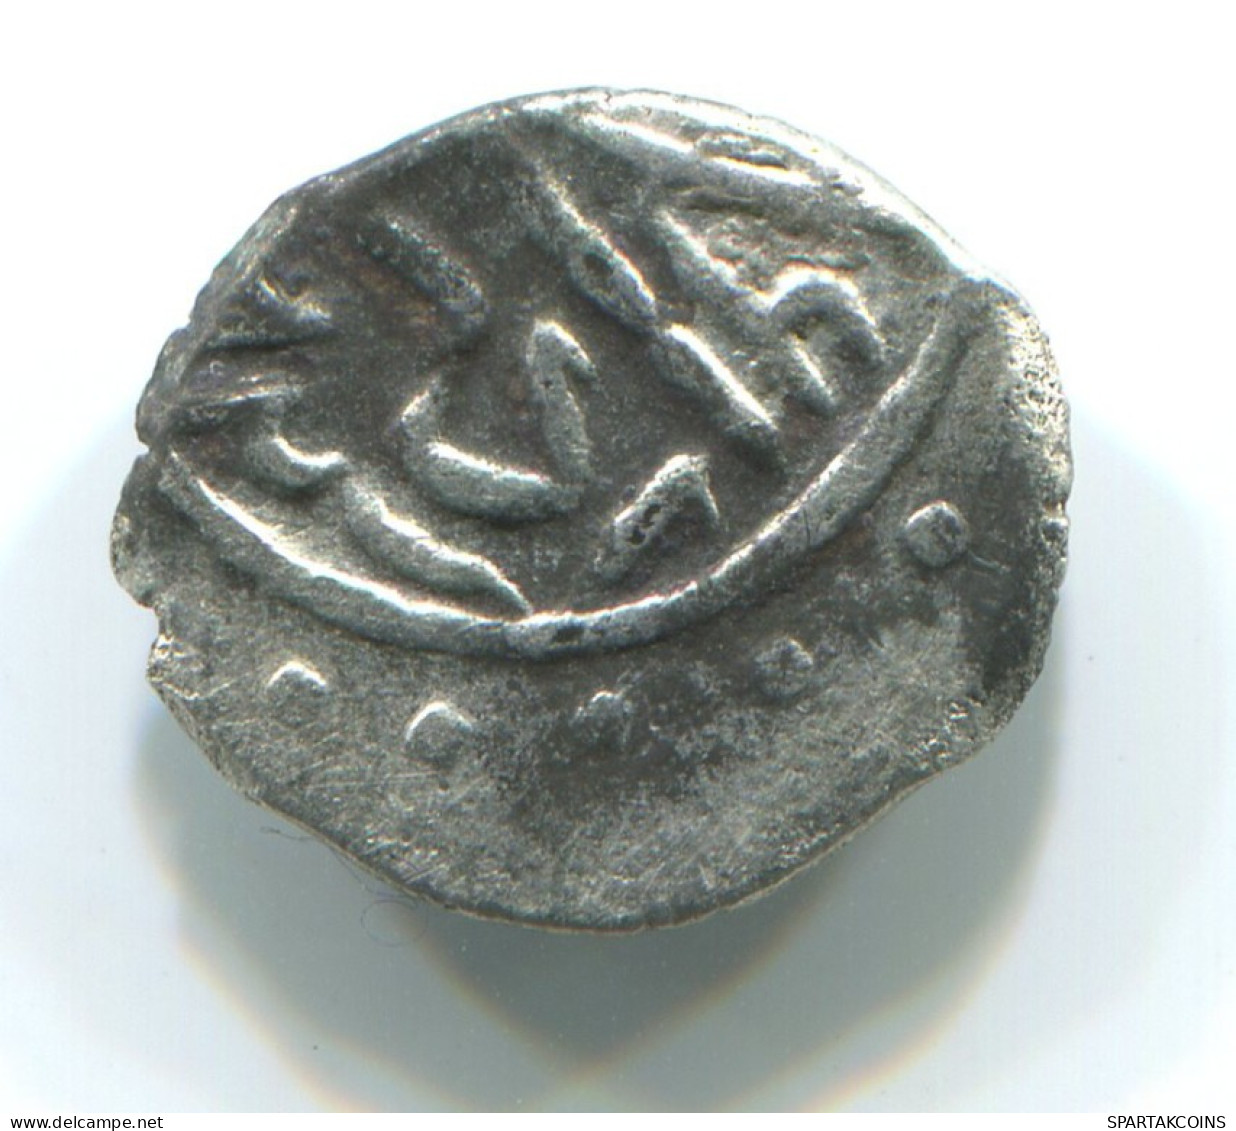 Authentic Medieval ISLAMIC Coin 0.8g/12mm #ANT2495.10.F.A - Islamitisch